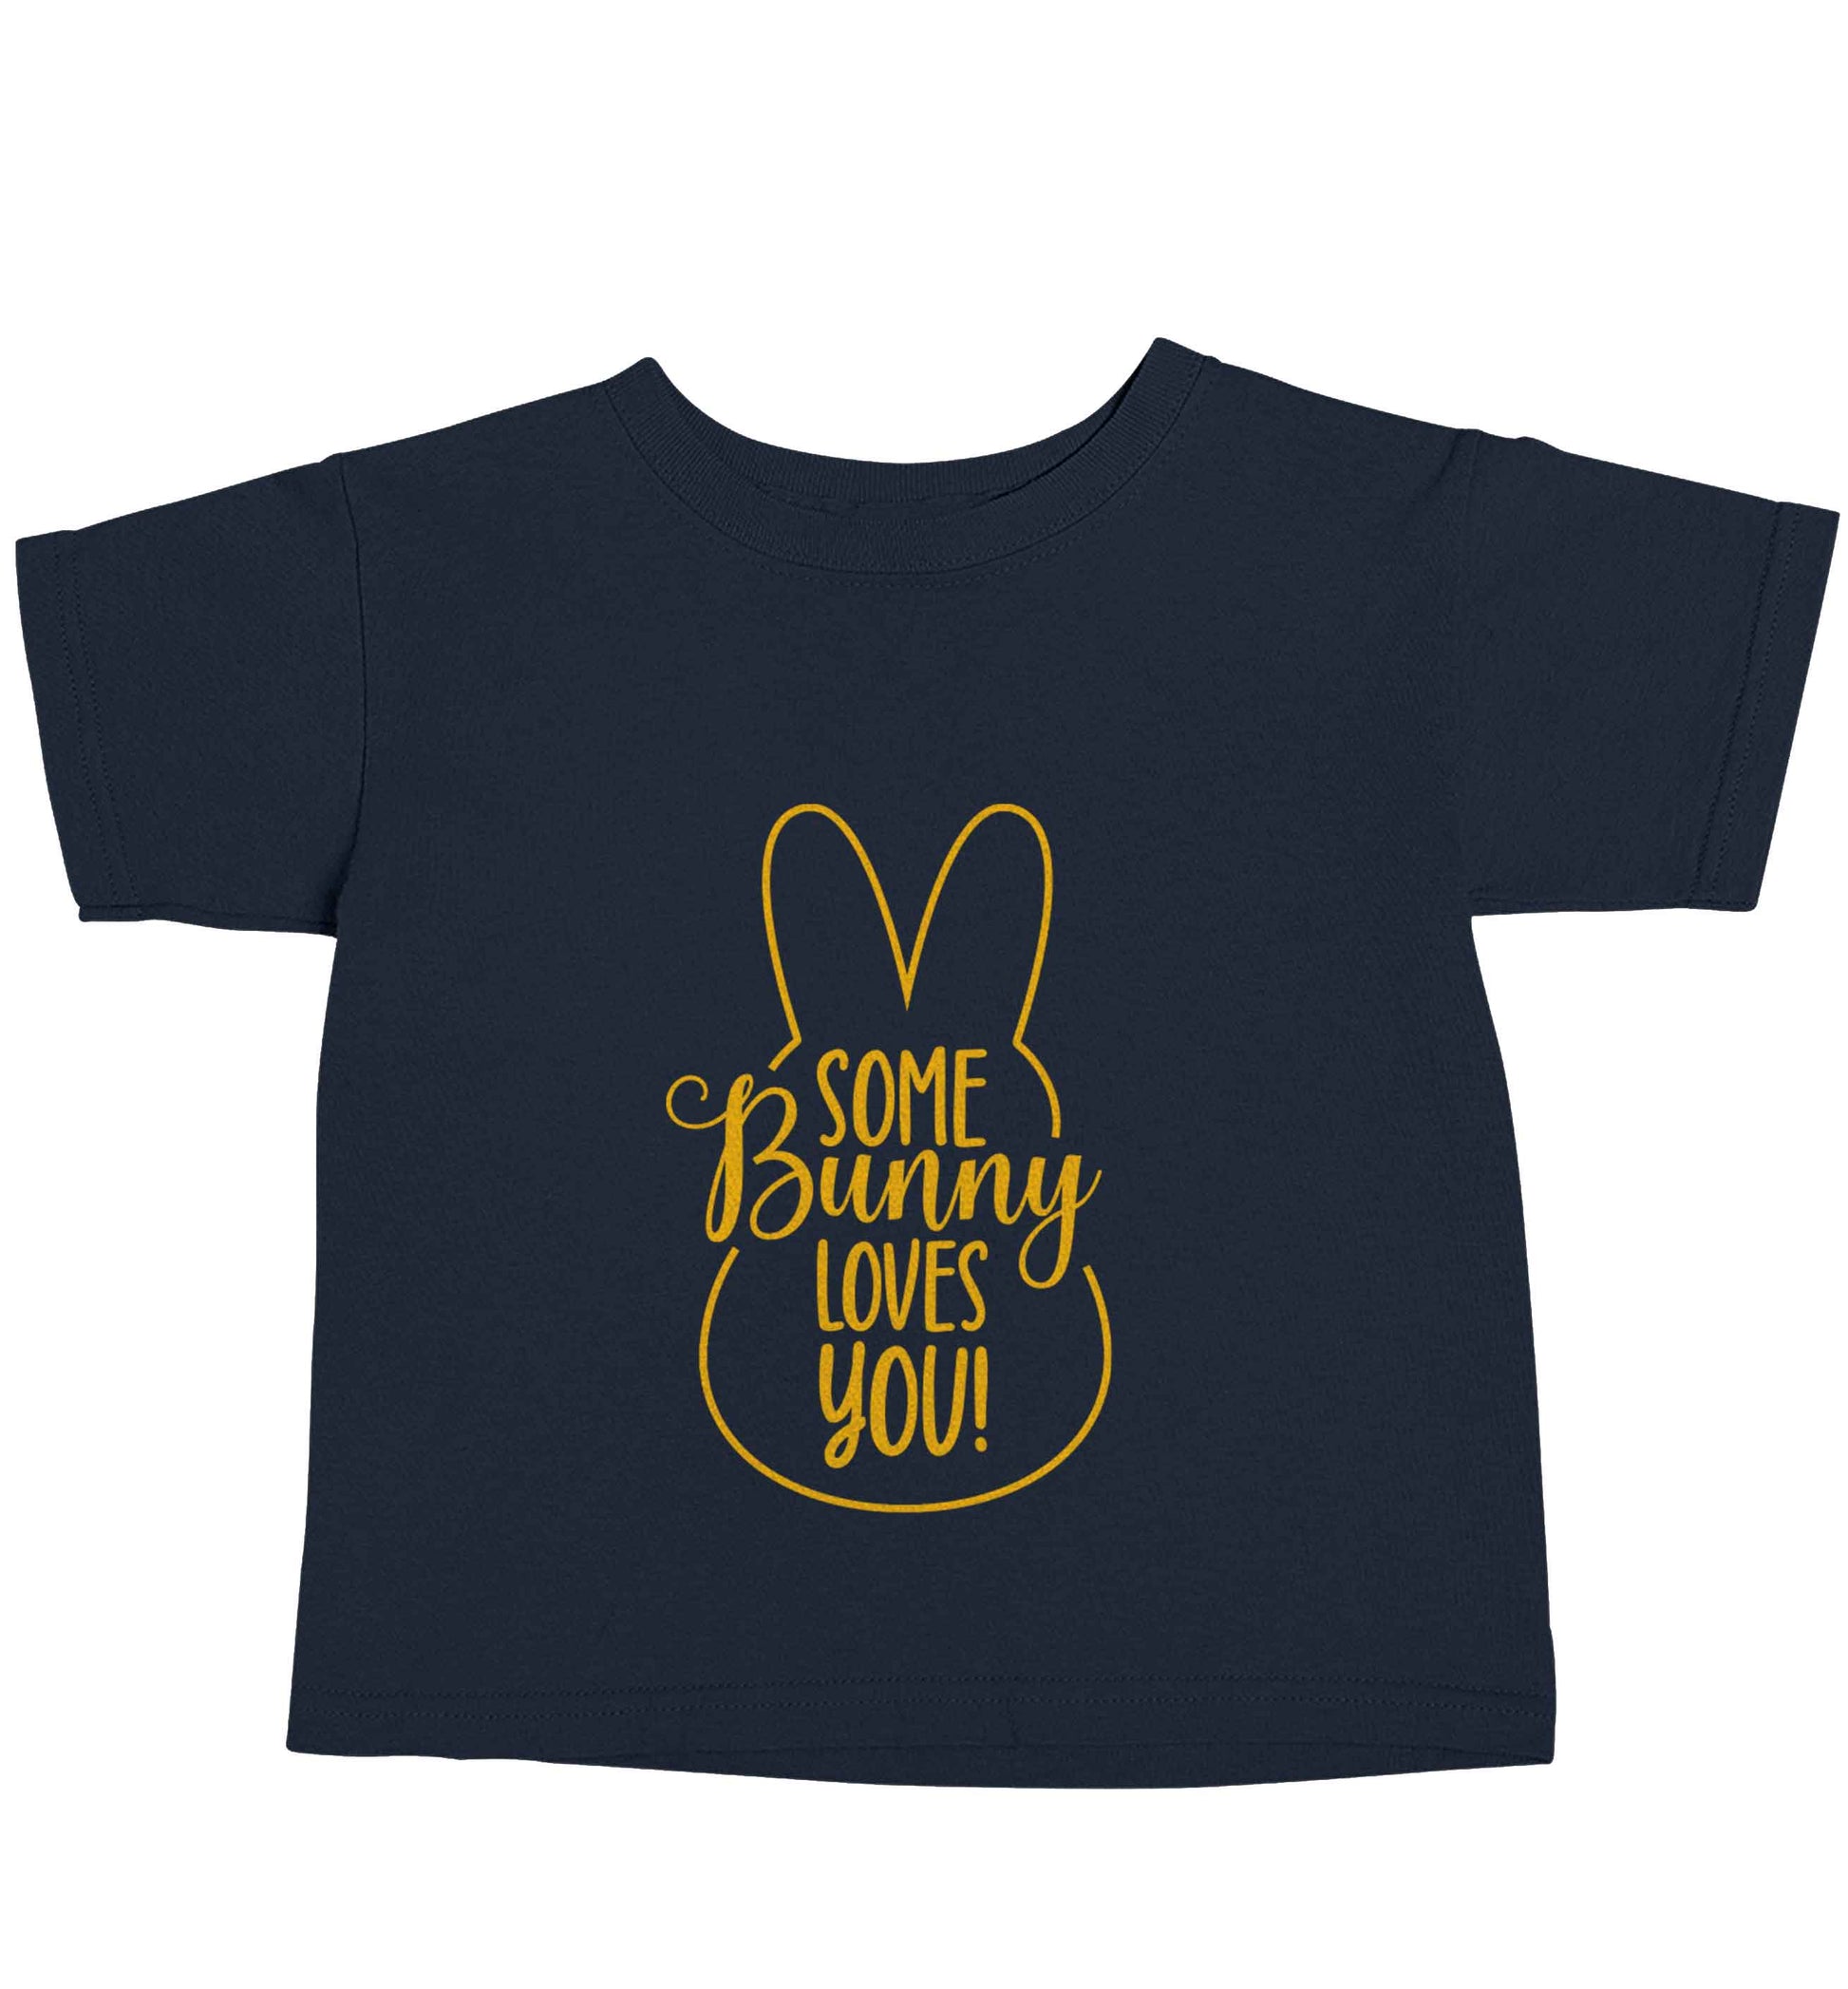 Some bunny loves you navy baby toddler Tshirt 2 Years